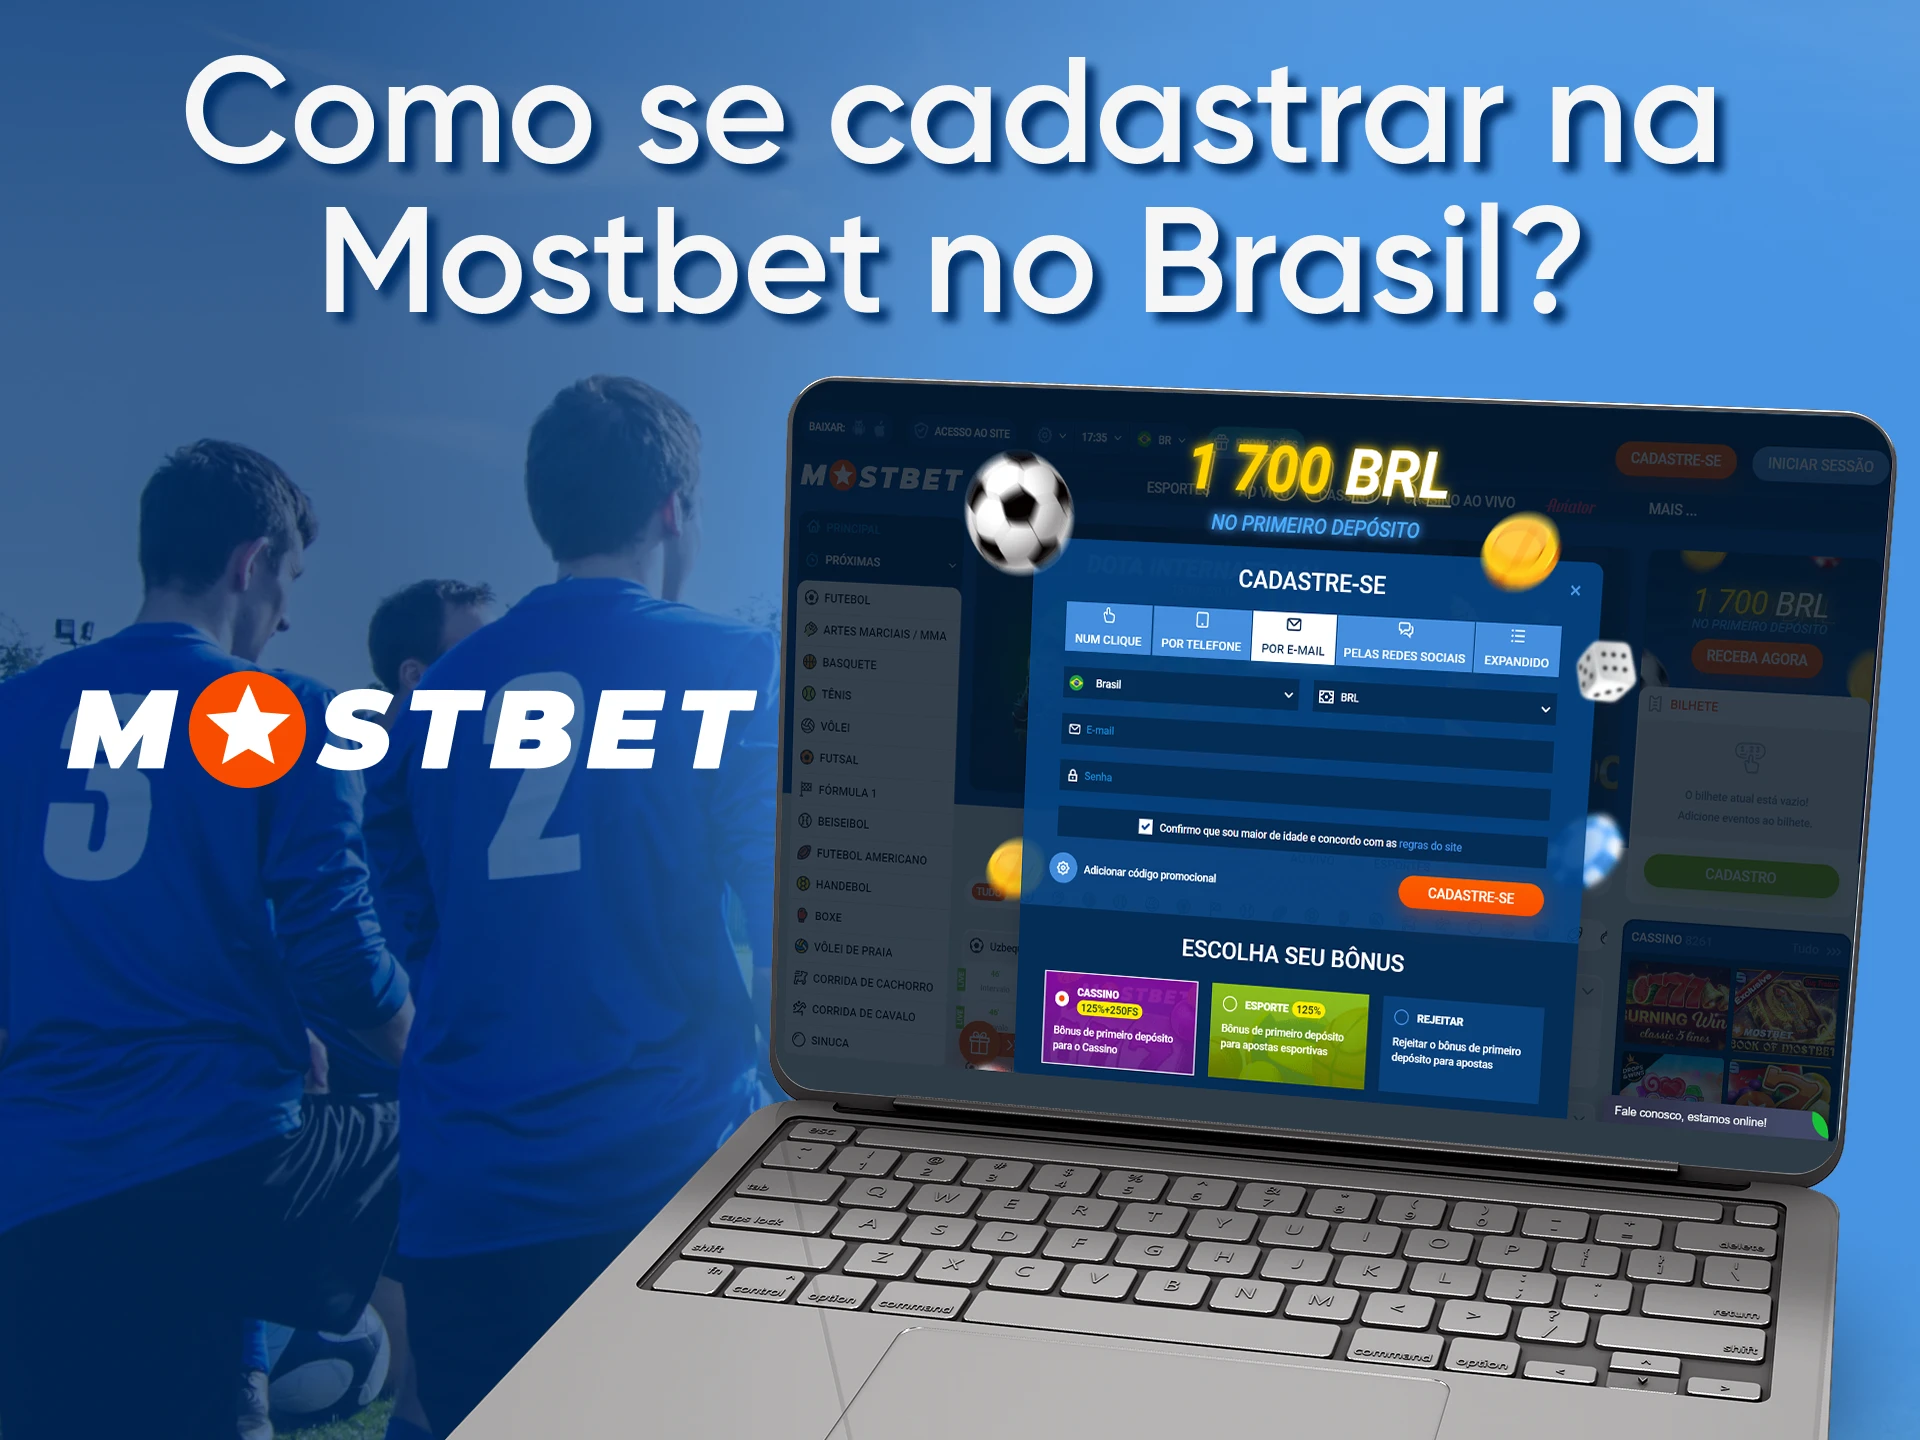 You can install the Mostbet app on your phone.